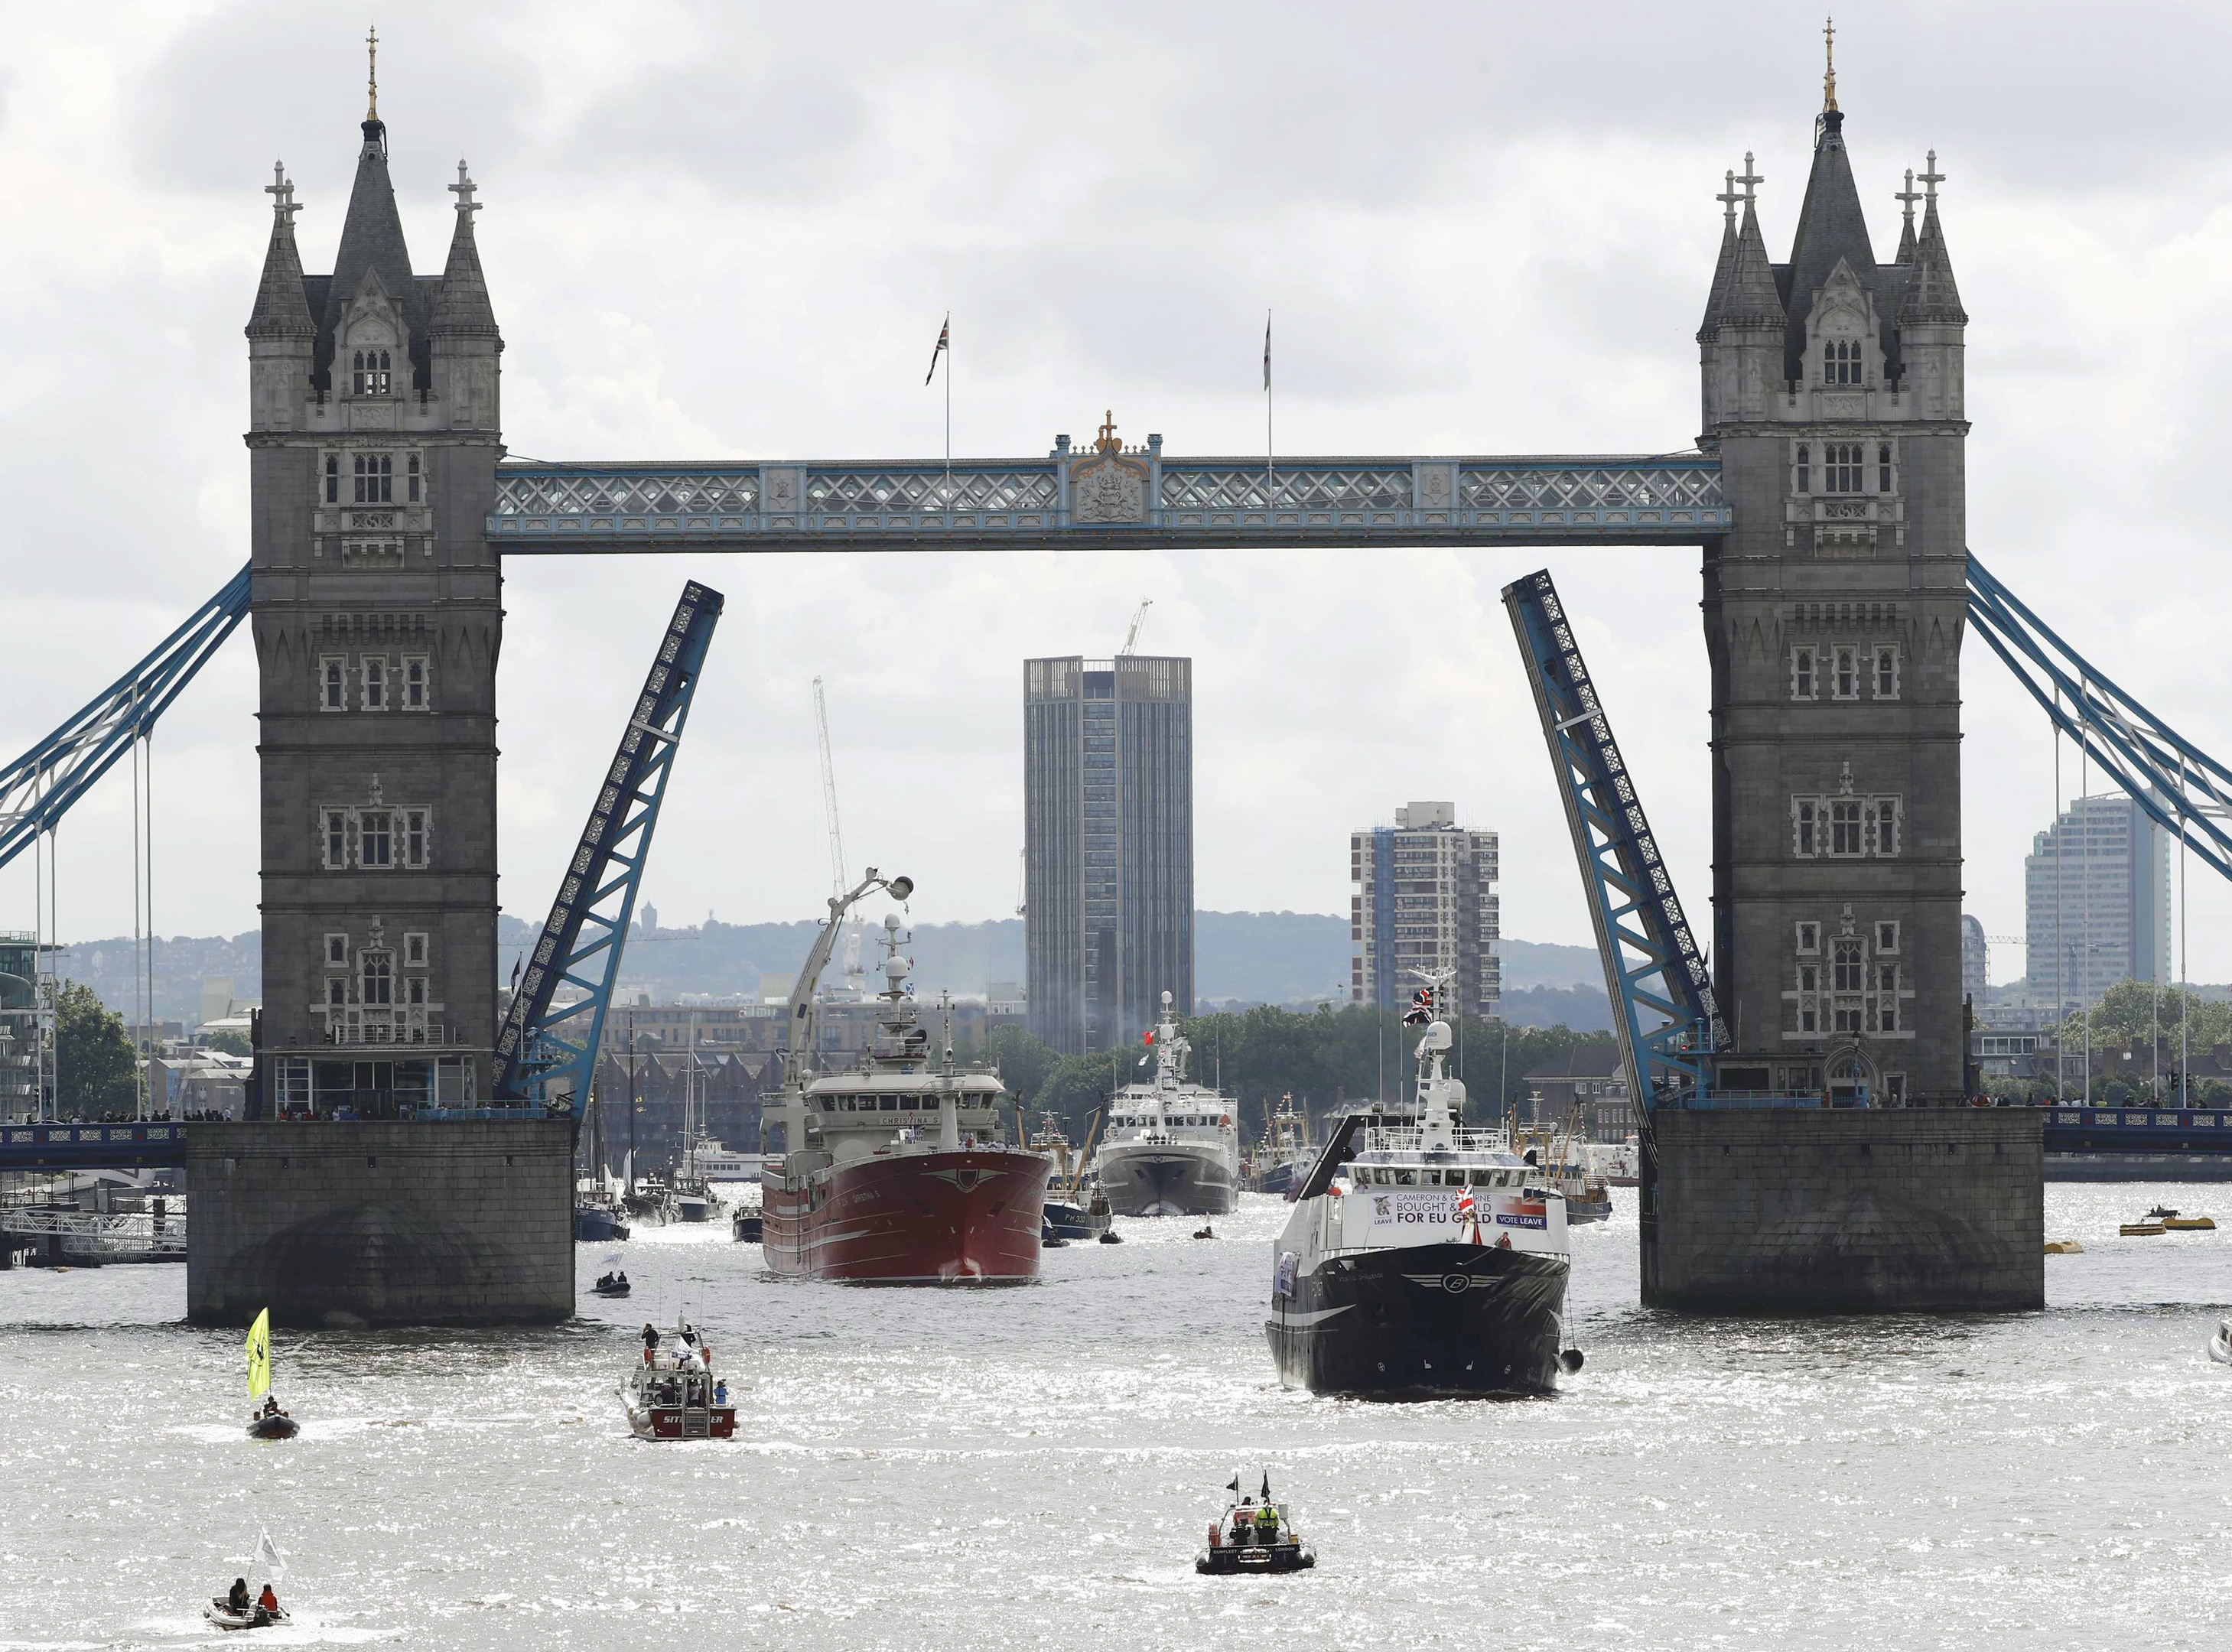 A pro-Remain inflatable dinghy sails alongside a Fishing for Leave pro-Brexit "flotilla" making its way under Tower Bridge.